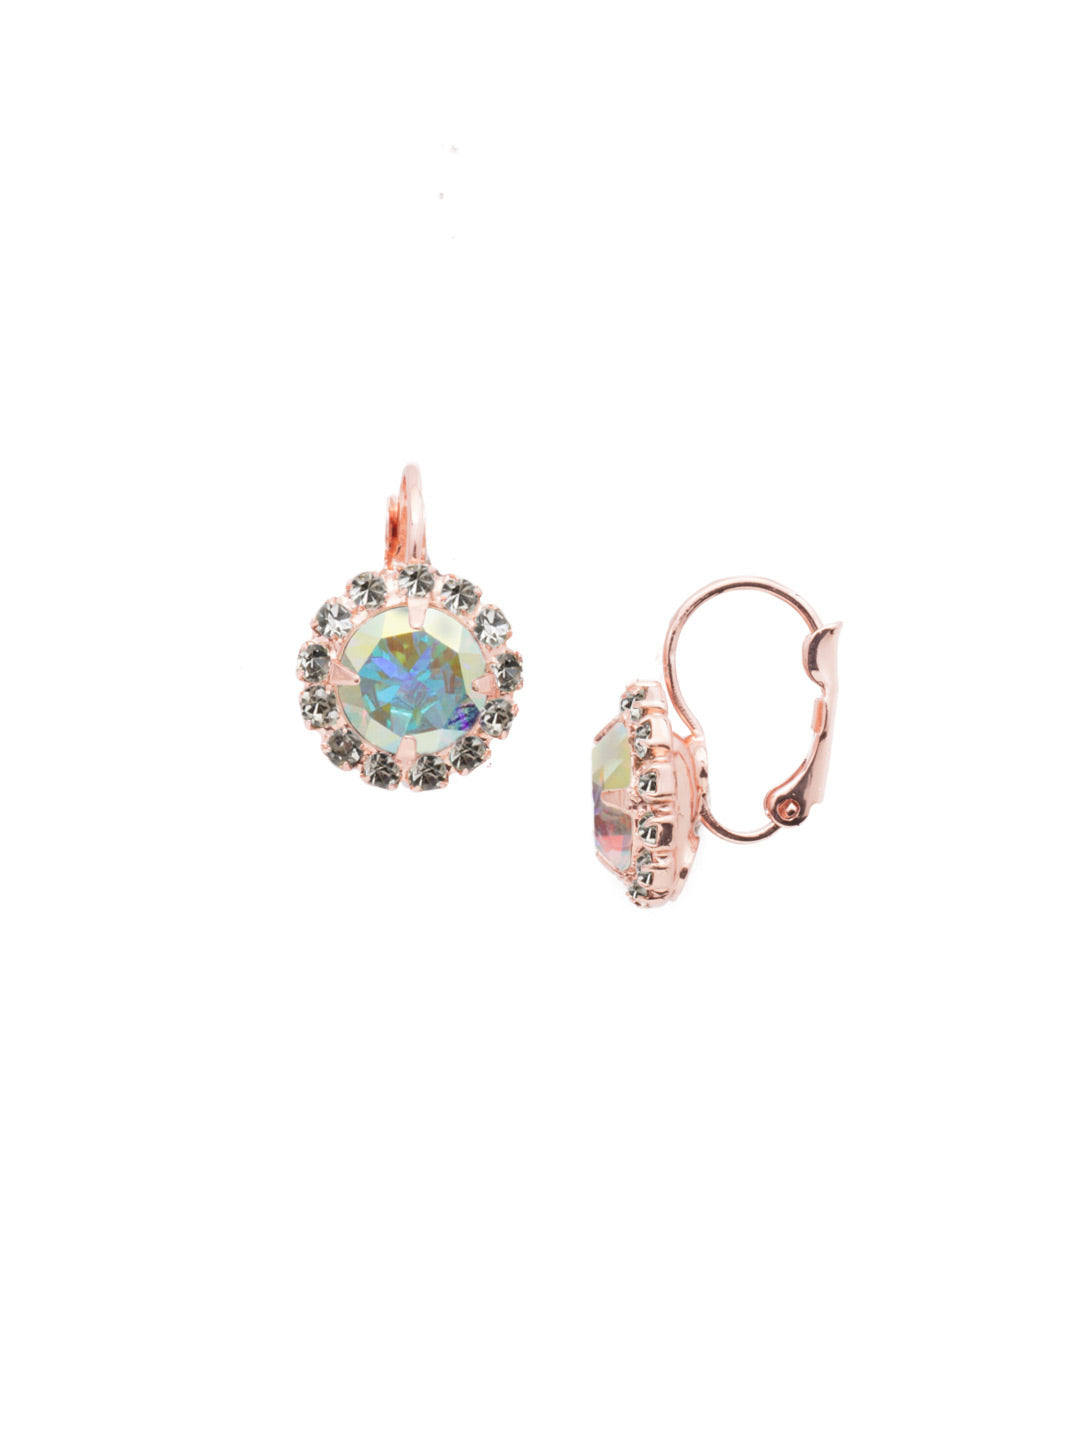 Haute Halo Dangle Earrings - EDL10RGCAB - <p>A central round crystal with an elegant halo of gems embodies elegance and style. From Sorrelli's Crystal Aurora Borealis collection in our Rose Gold-tone finish.</p>